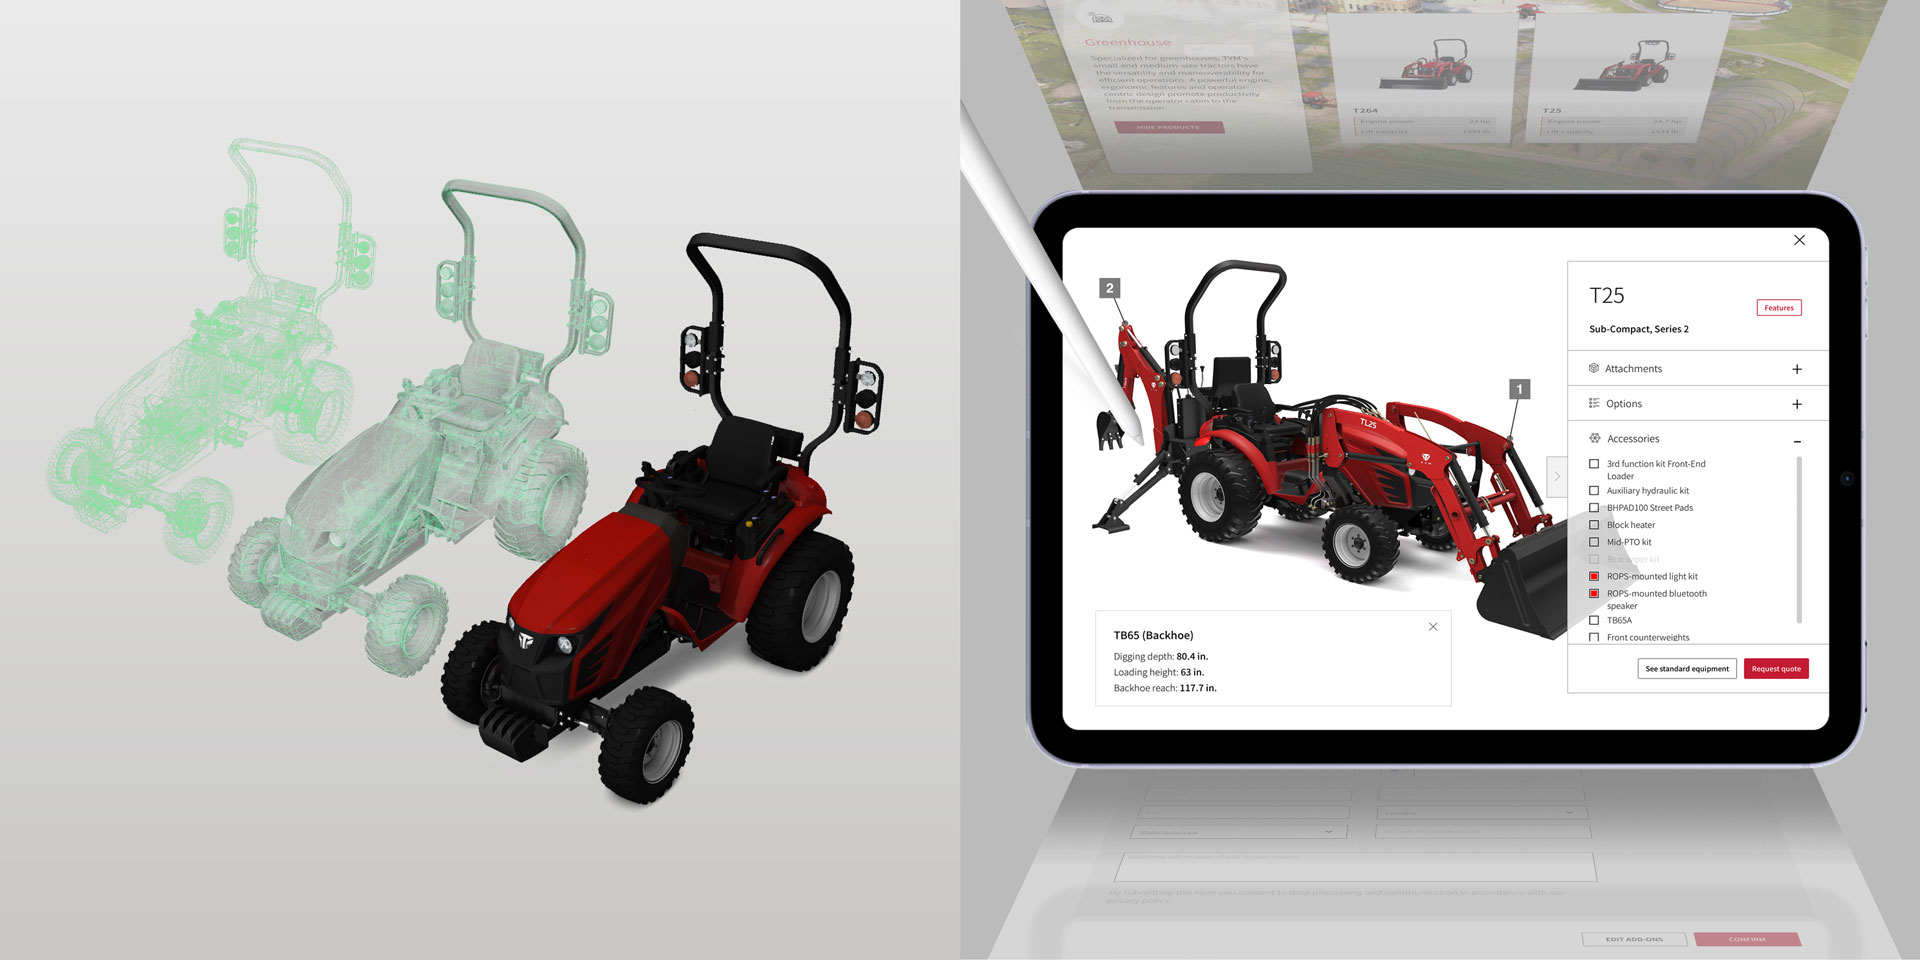 Examples of 3D utility tractor models and specification screens showing how product details are displayed